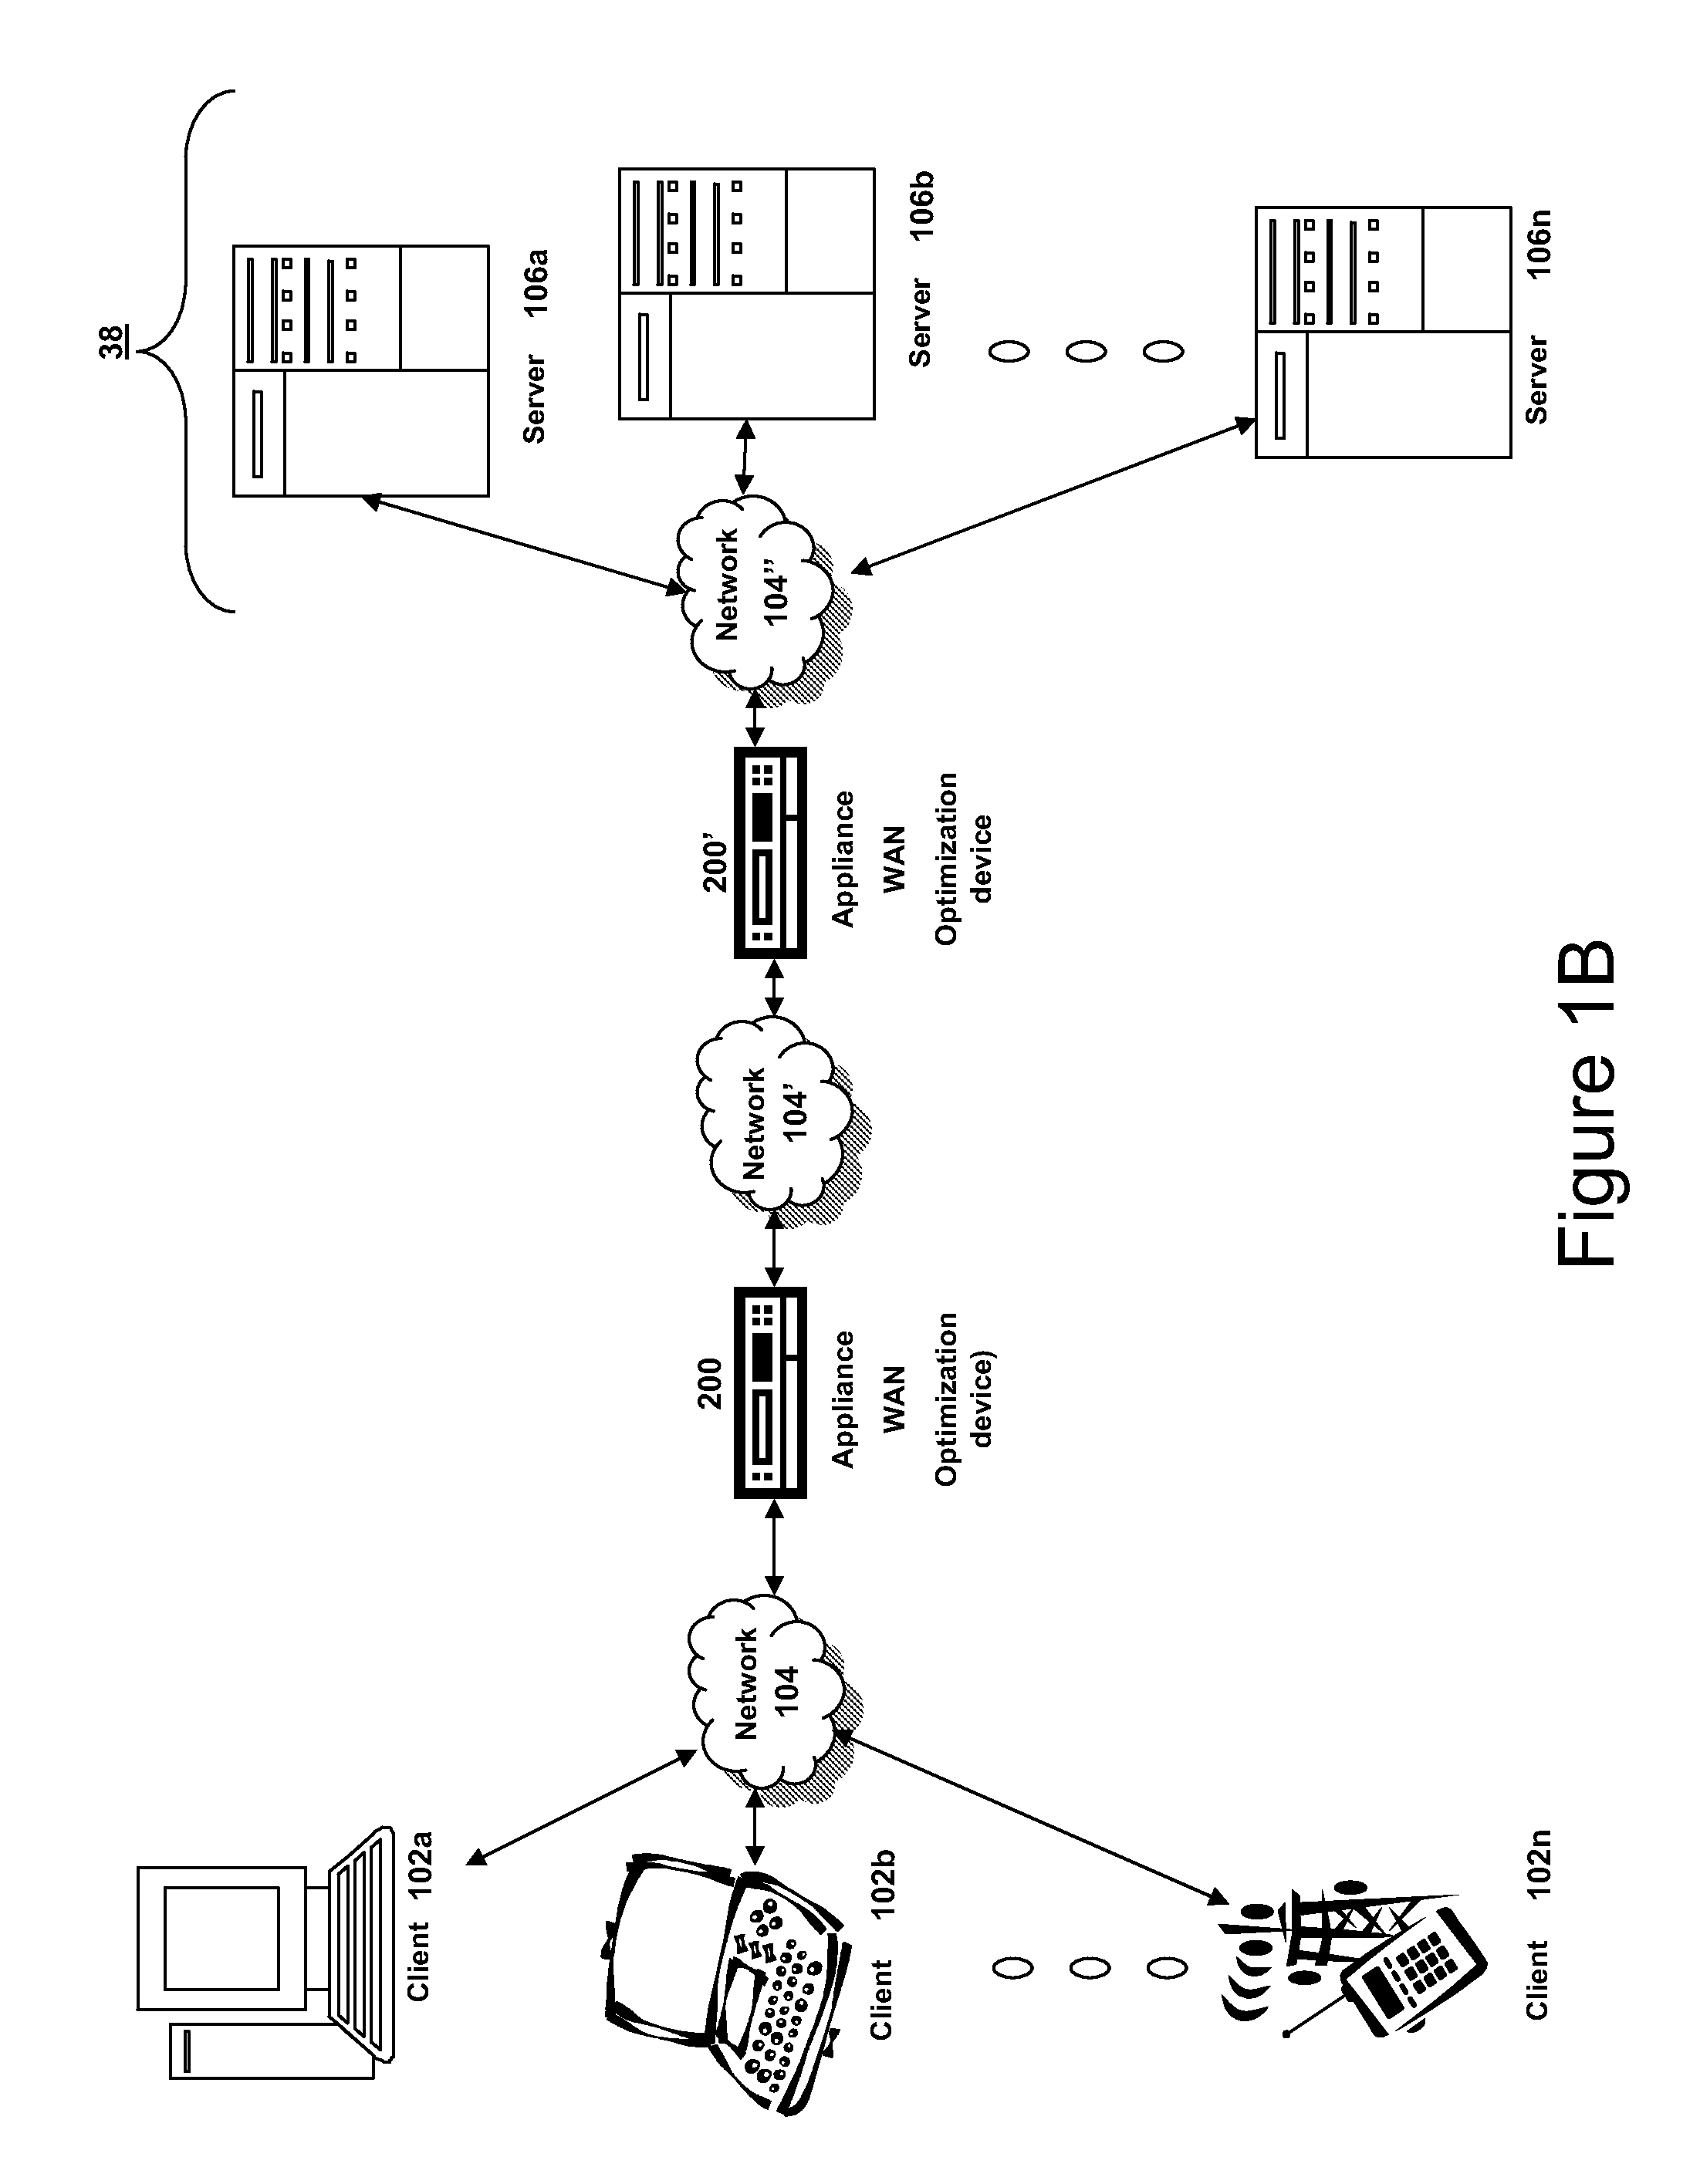 Systems and methods for allocation of classes of service to network connections corresponding to virtual channels